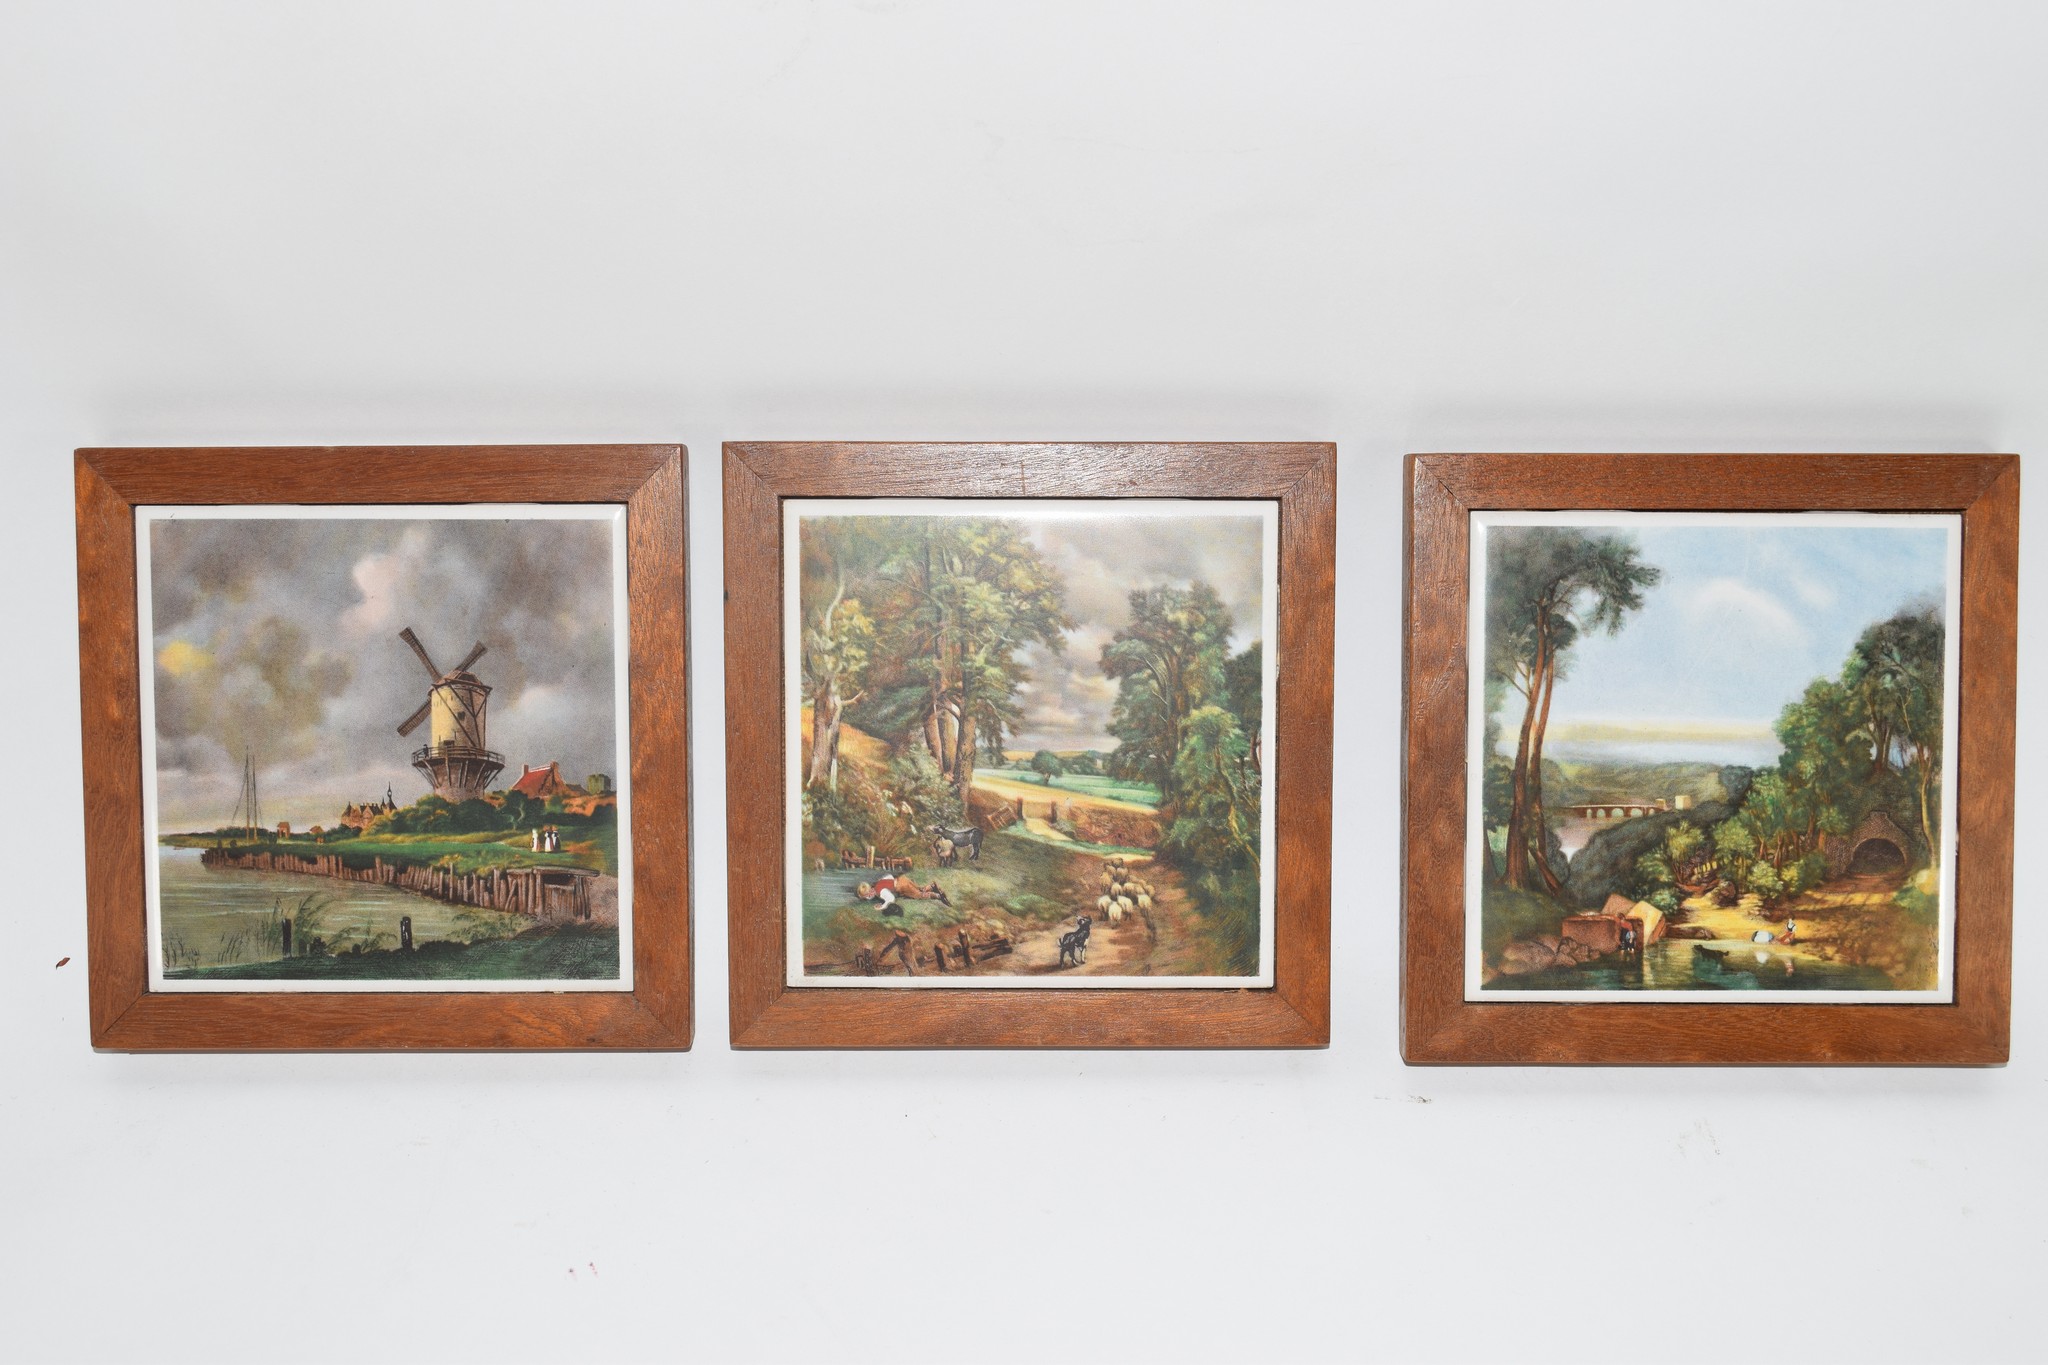 GROUP OF WOODEN COASTERS WITH DUTCH LANDSCAPE SCENES